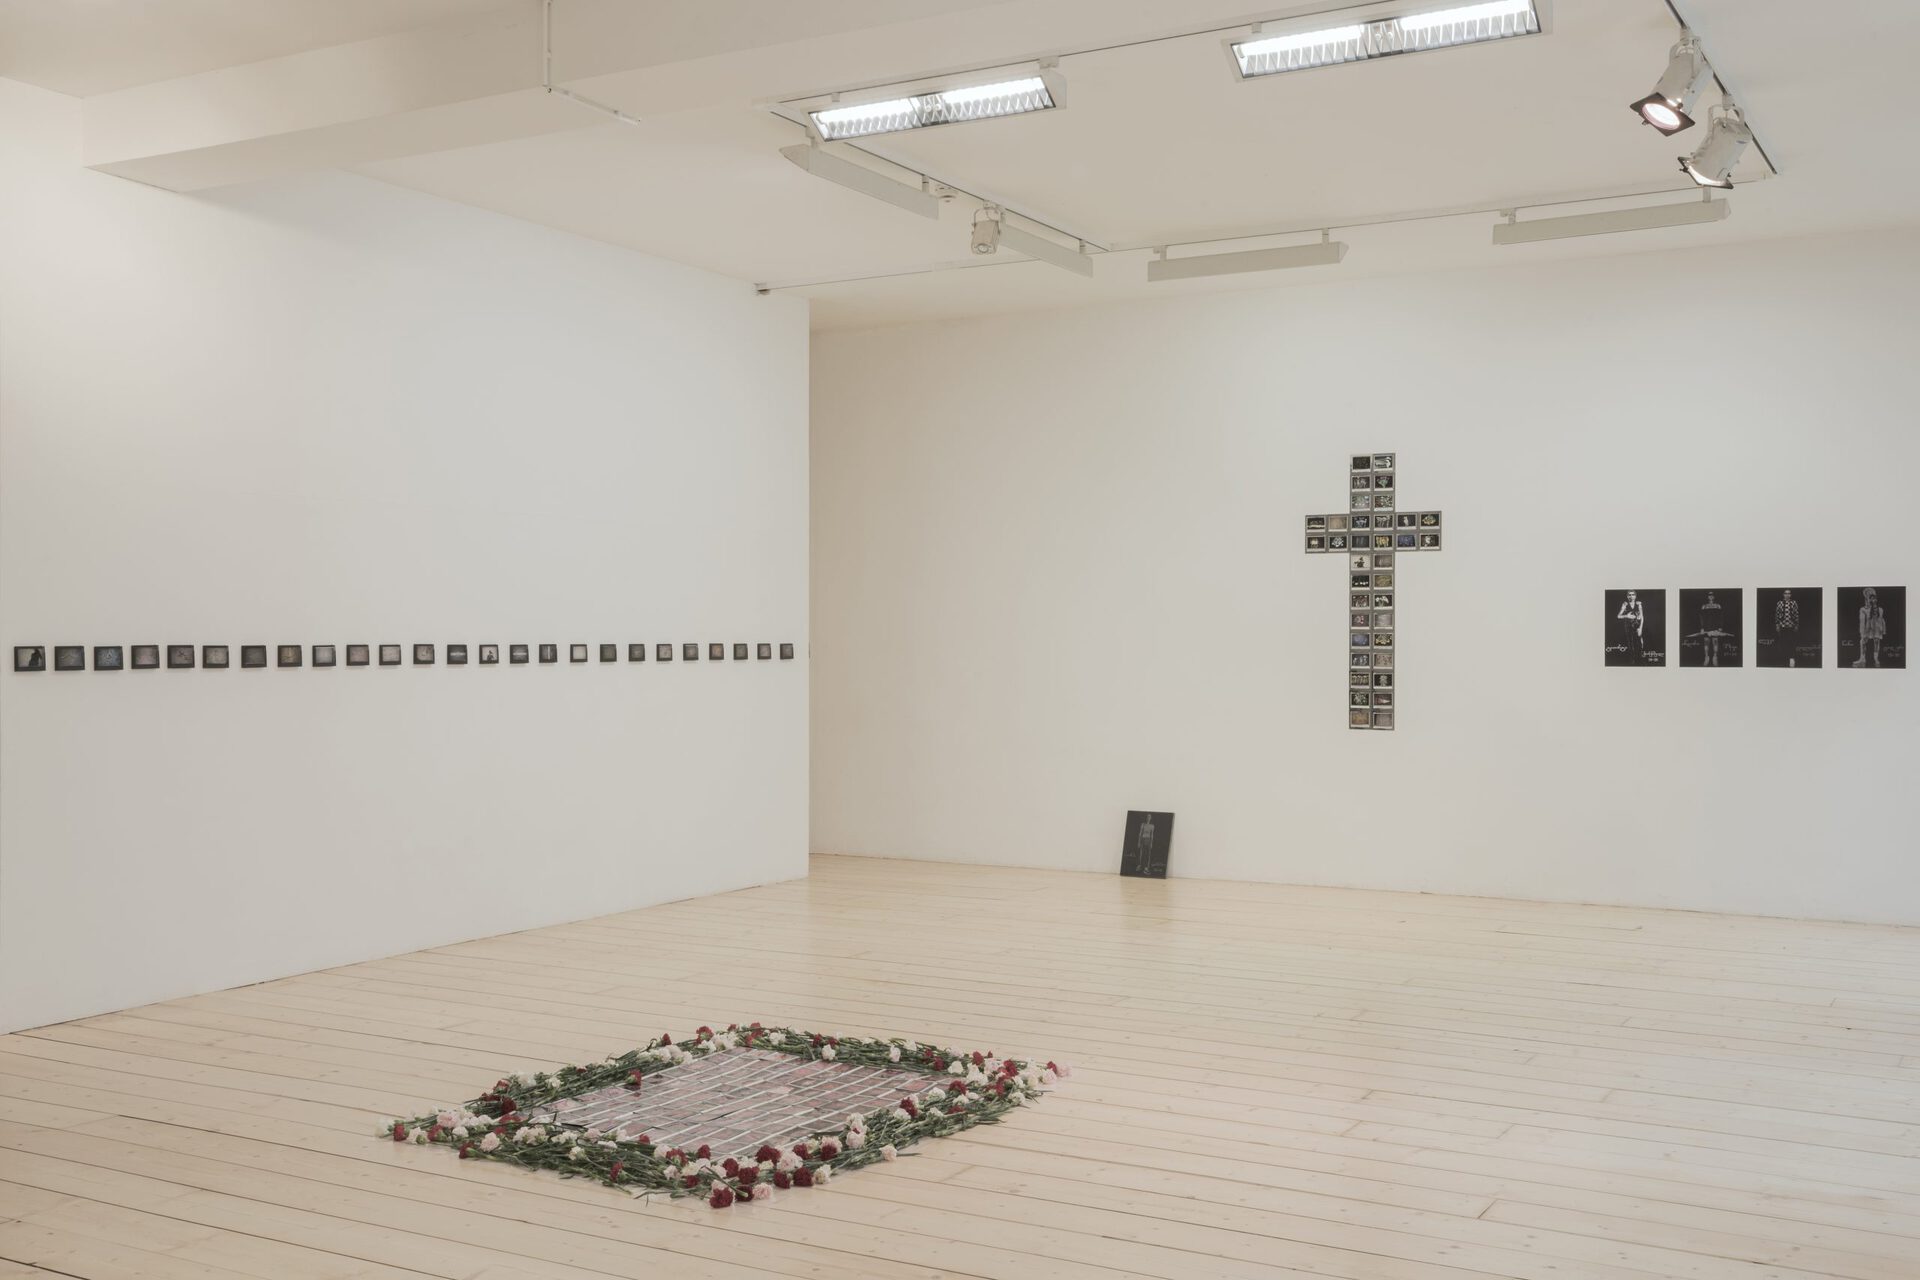 Installation view,Lascia ch'io pianga* (Let me weep), mom art space, Hamburg, works by Nata Sopromadze